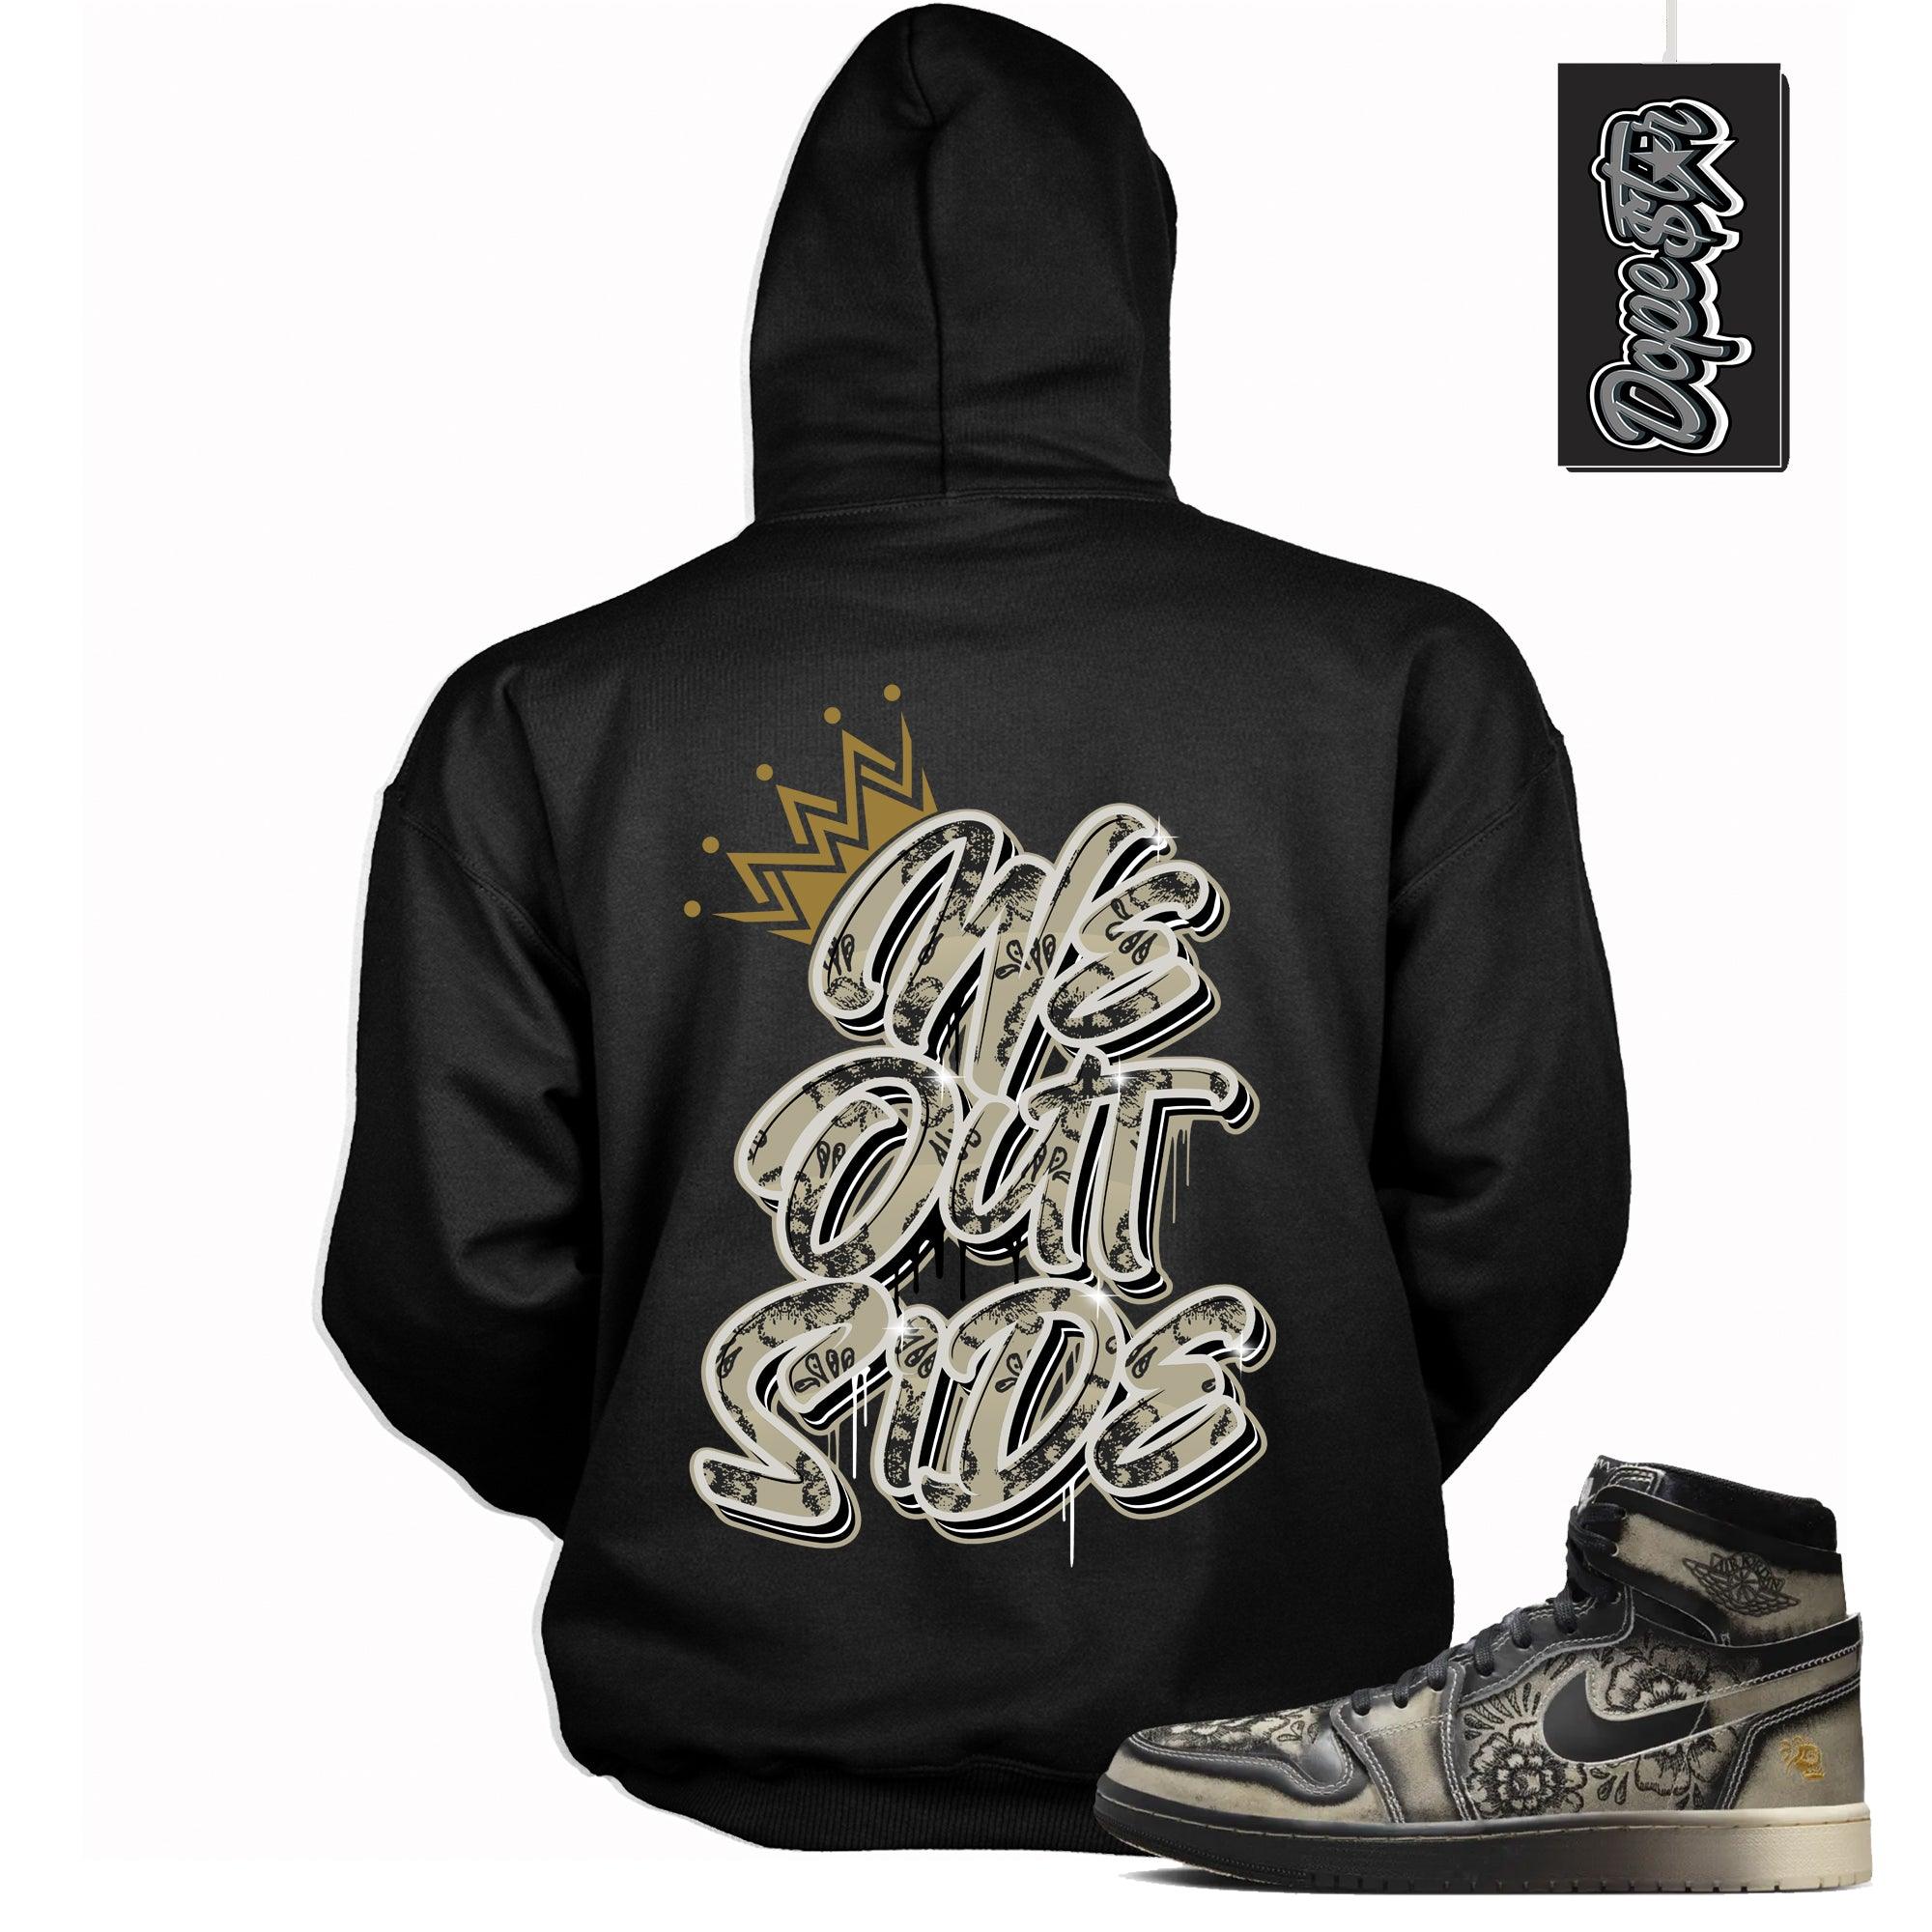 Cool Black Graphic Hoodie with “ We Outside “ print, that perfectly matches Air Jordan 1 High Zoom Comfort 2 Dia de Muertos Black and Pale Ivory sneakers